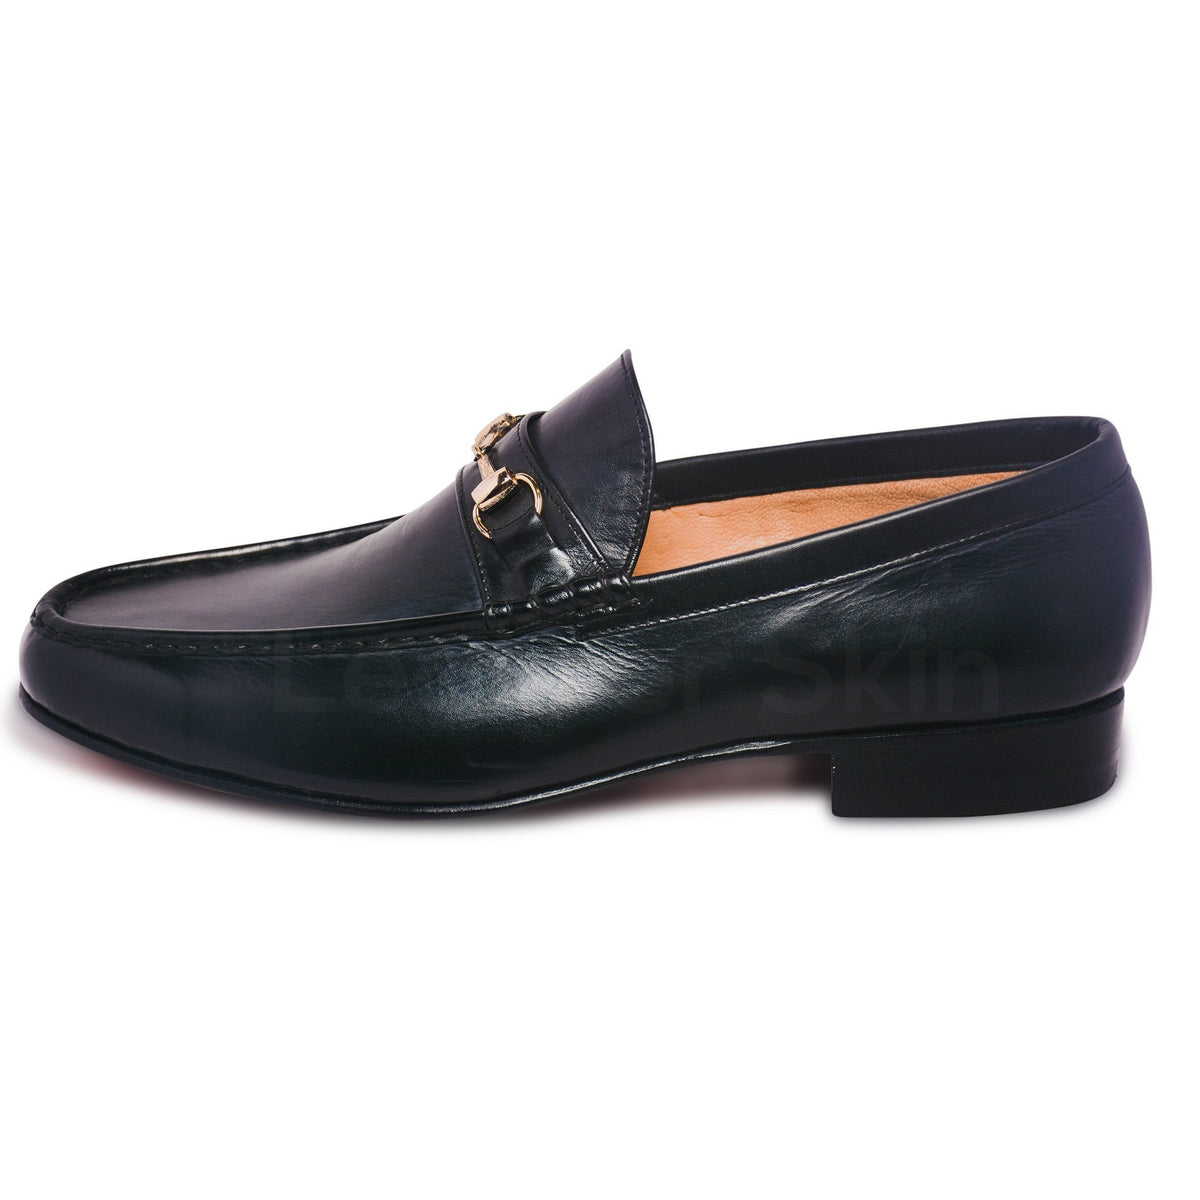 Black Loafers Shoes with Gold Metal Decoration - Leather Skin Shop